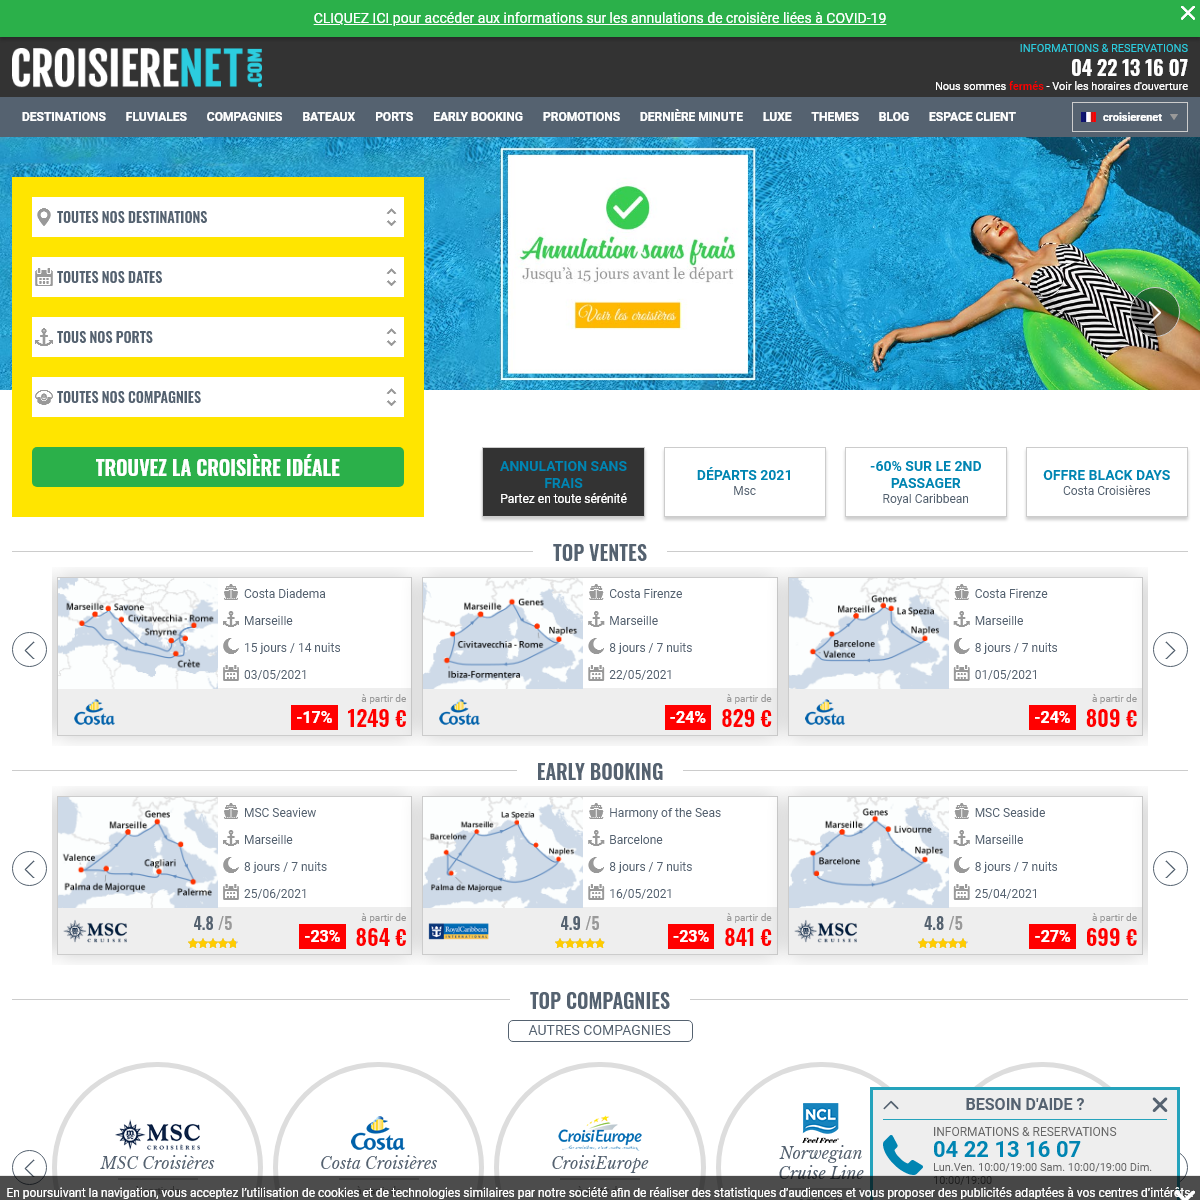 A complete backup of croisierenet.com